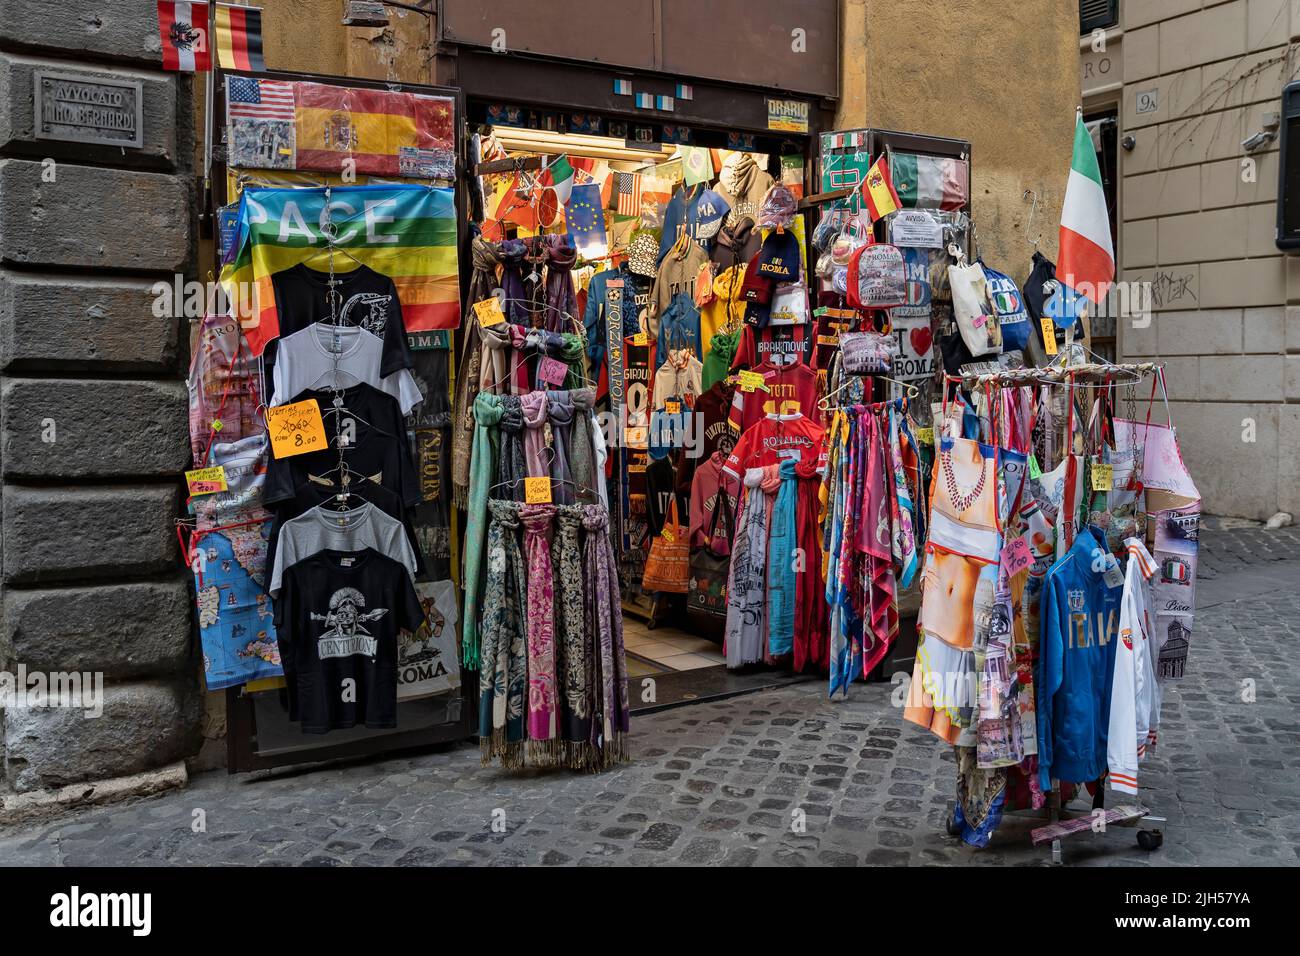 Souvenir storefront with lots of merchandise displayed out on the street. Souvenirs shopping. Rome, Italy, Europe, European Union, EU. Stock Photo